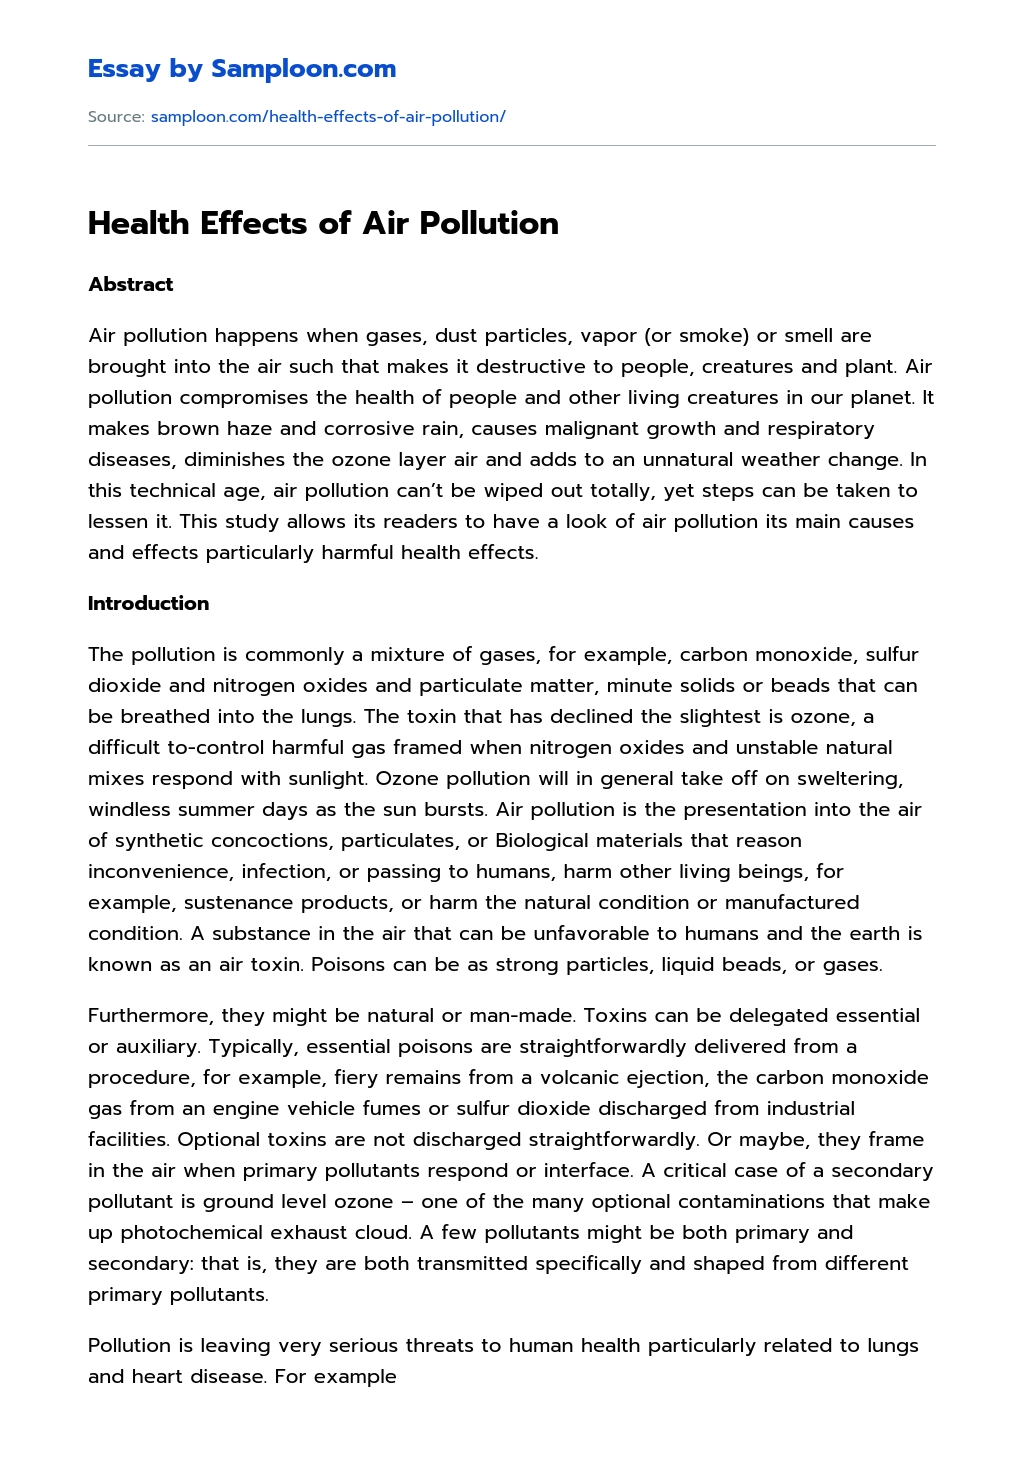 effects of pollution on human health essay